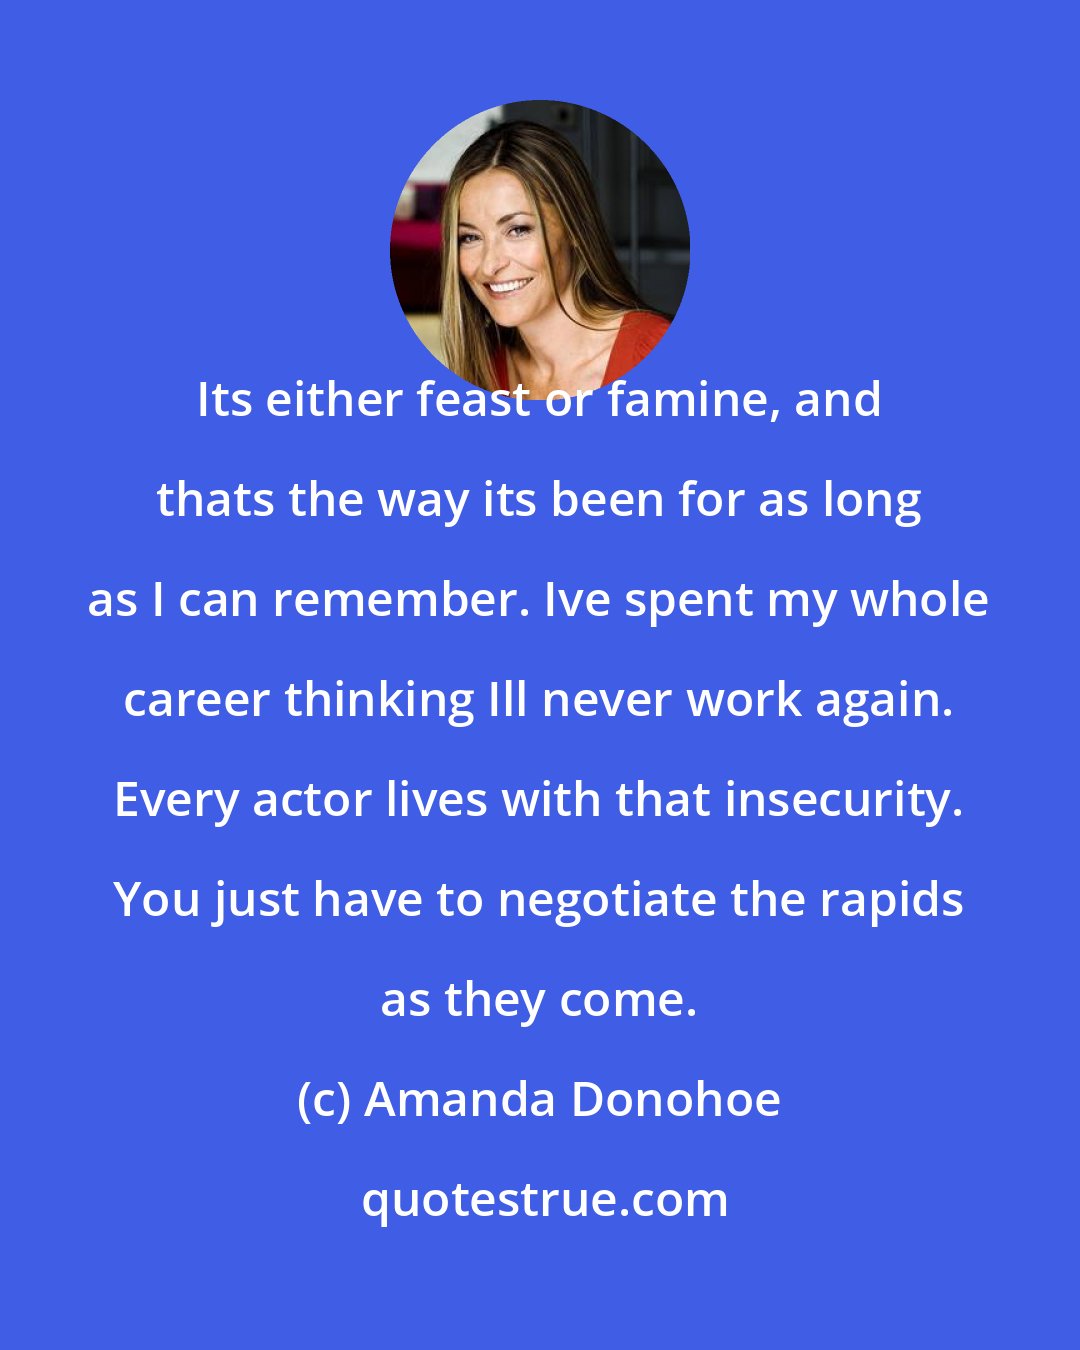 Amanda Donohoe: Its either feast or famine, and thats the way its been for as long as I can remember. Ive spent my whole career thinking Ill never work again. Every actor lives with that insecurity. You just have to negotiate the rapids as they come.